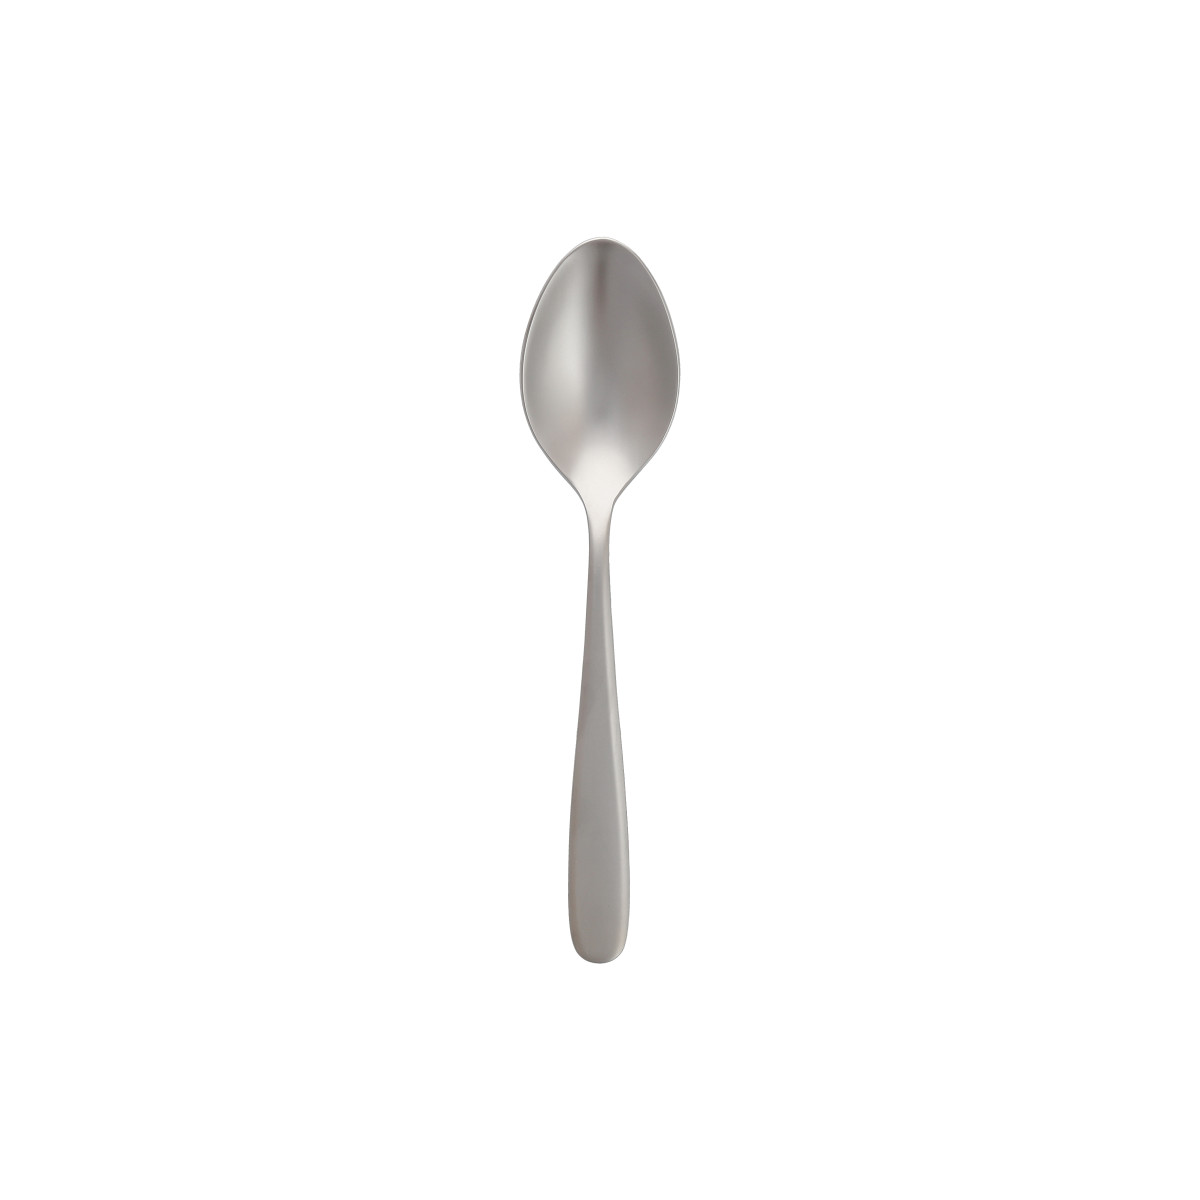 Grand City Sand Blasted Table Spoon 7.9"